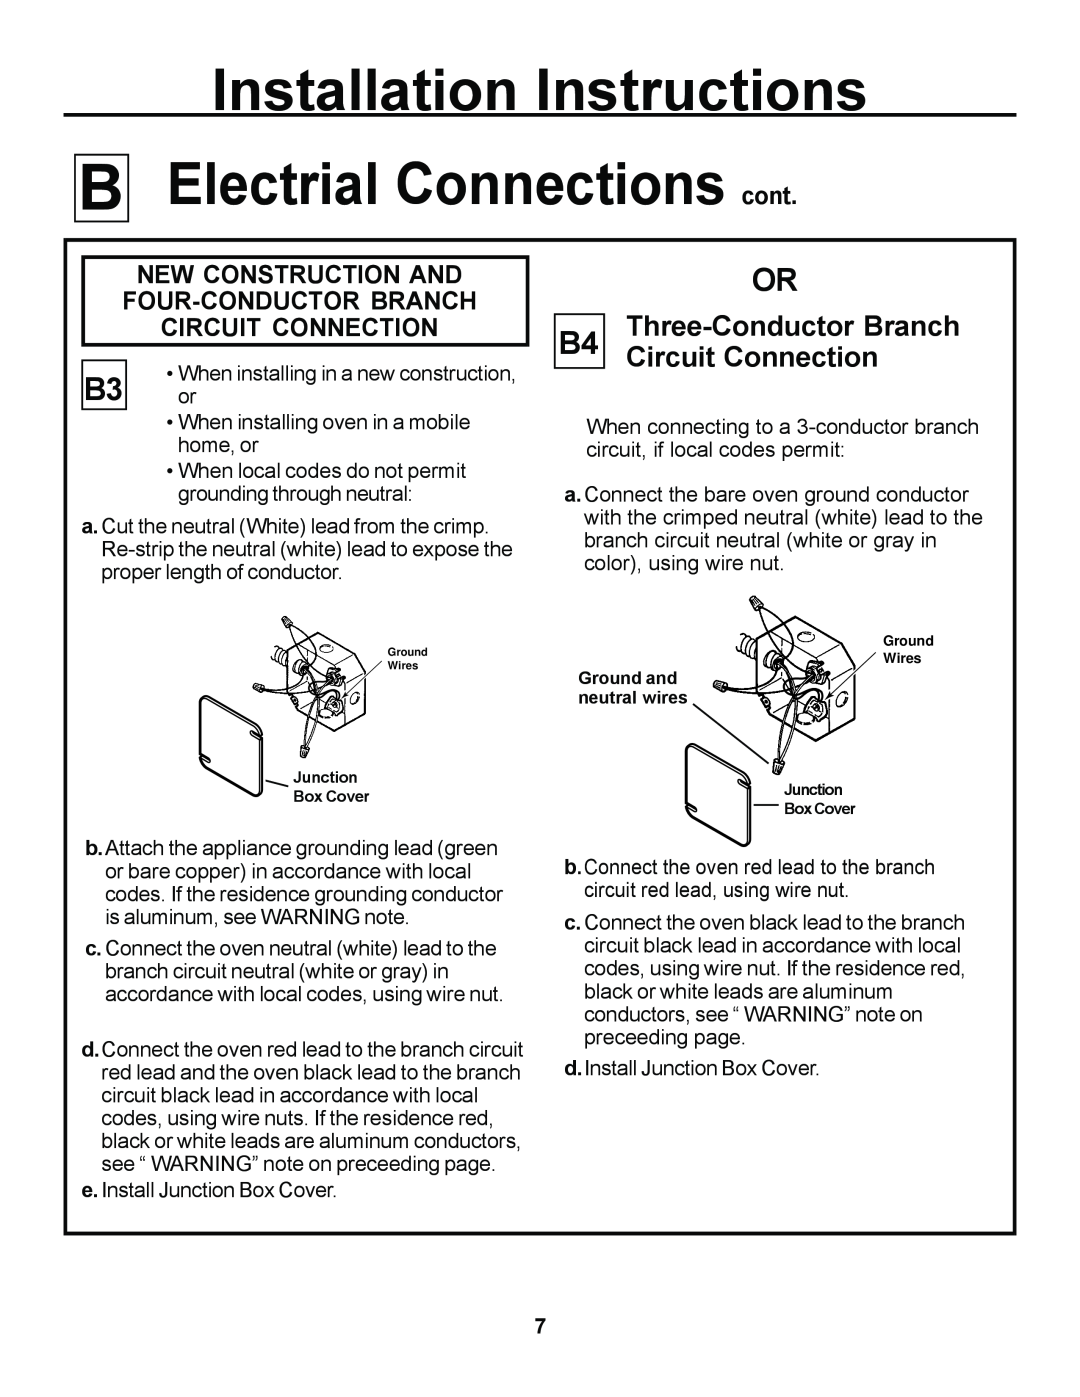 Cowon Systems JKP85 Electrial Connections cont, B4 Three-Conductor Branch Circuit Connection, Installation Instructions 